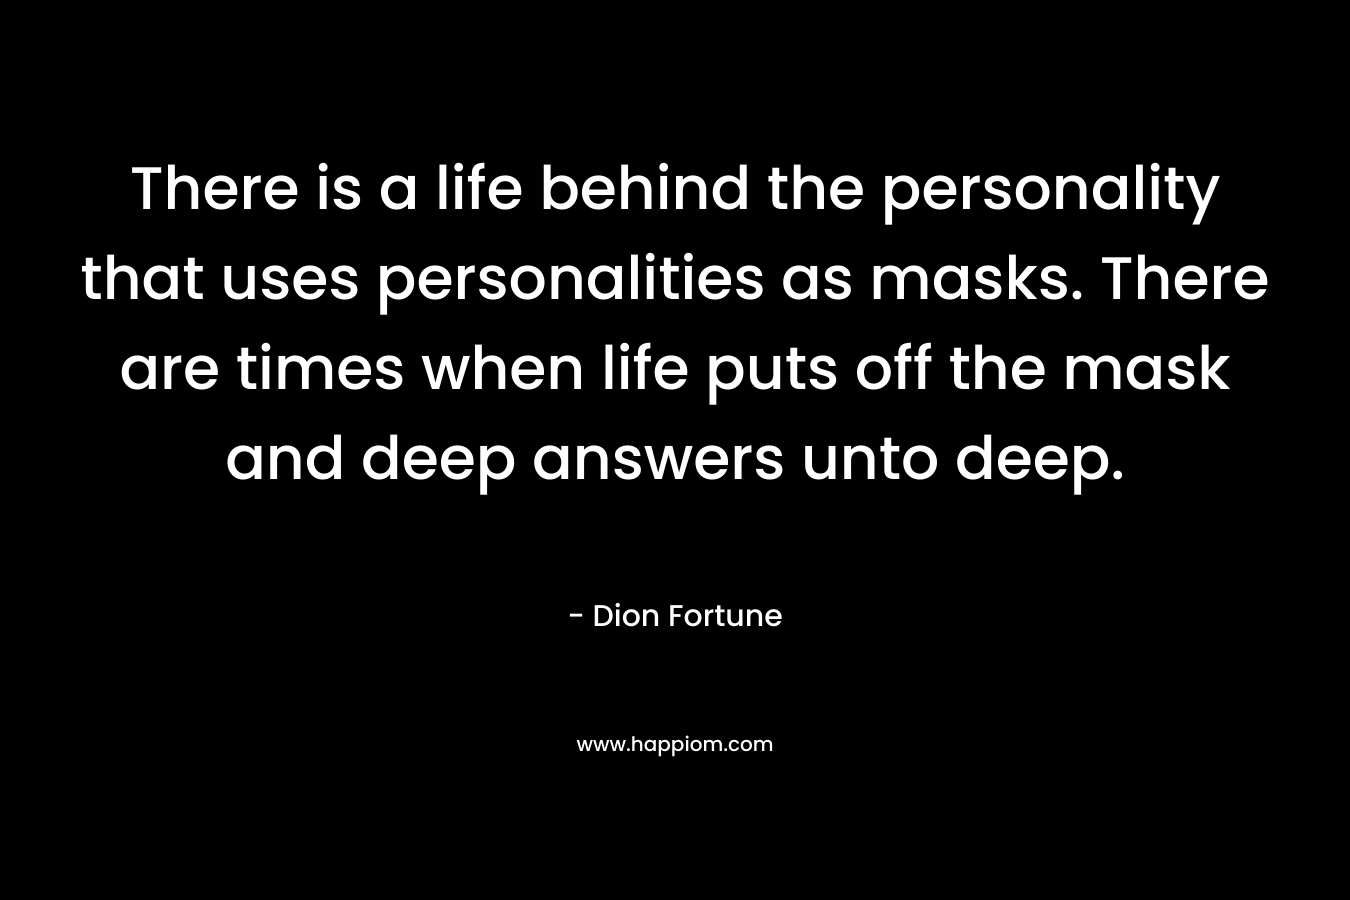 There is a life behind the personality that uses personalities as masks. There are times when life puts off the mask and deep answers unto deep.